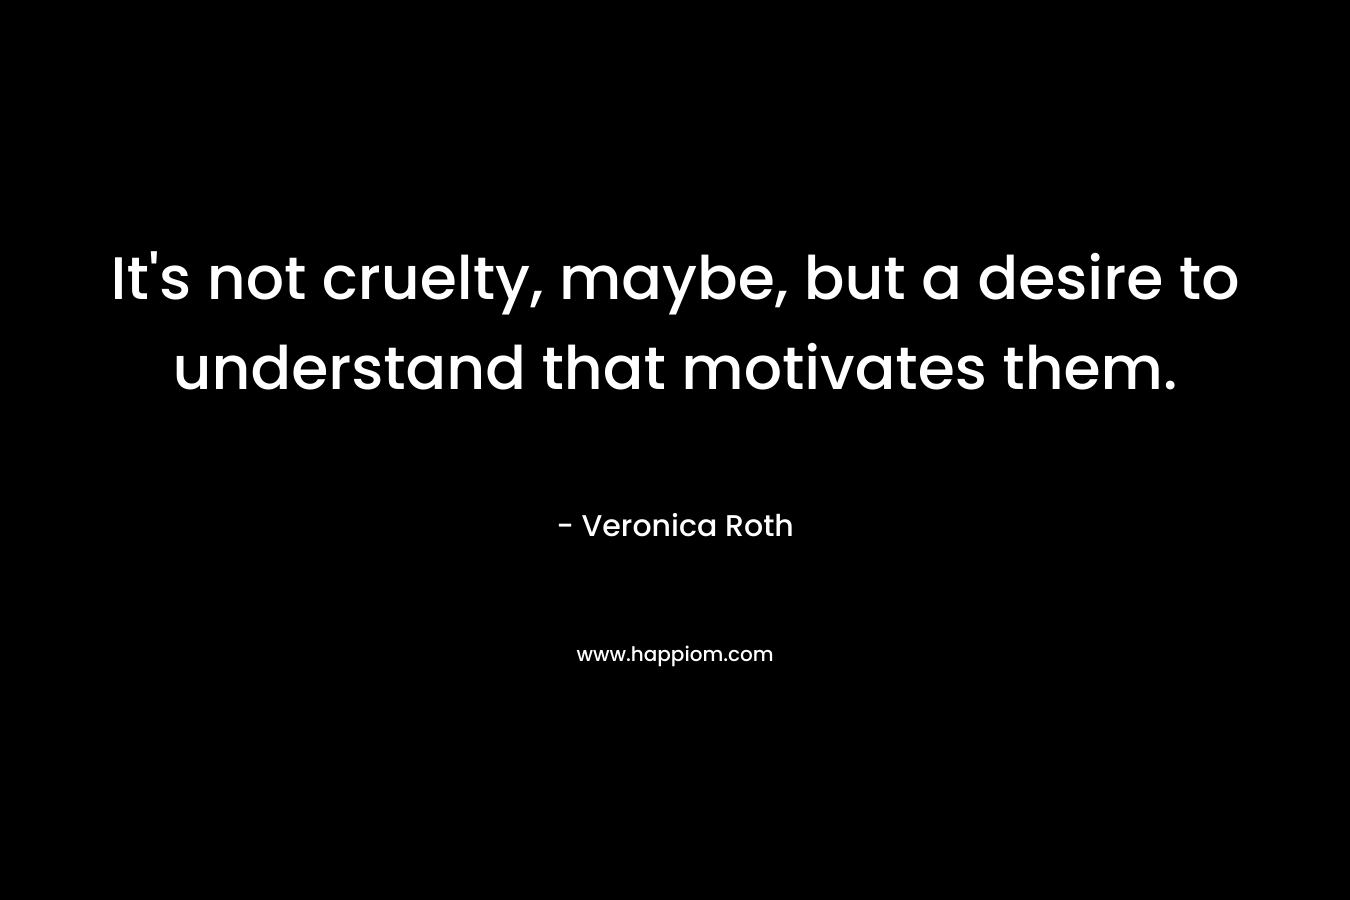 It’s not cruelty, maybe, but a desire to understand that motivates them. – Veronica Roth